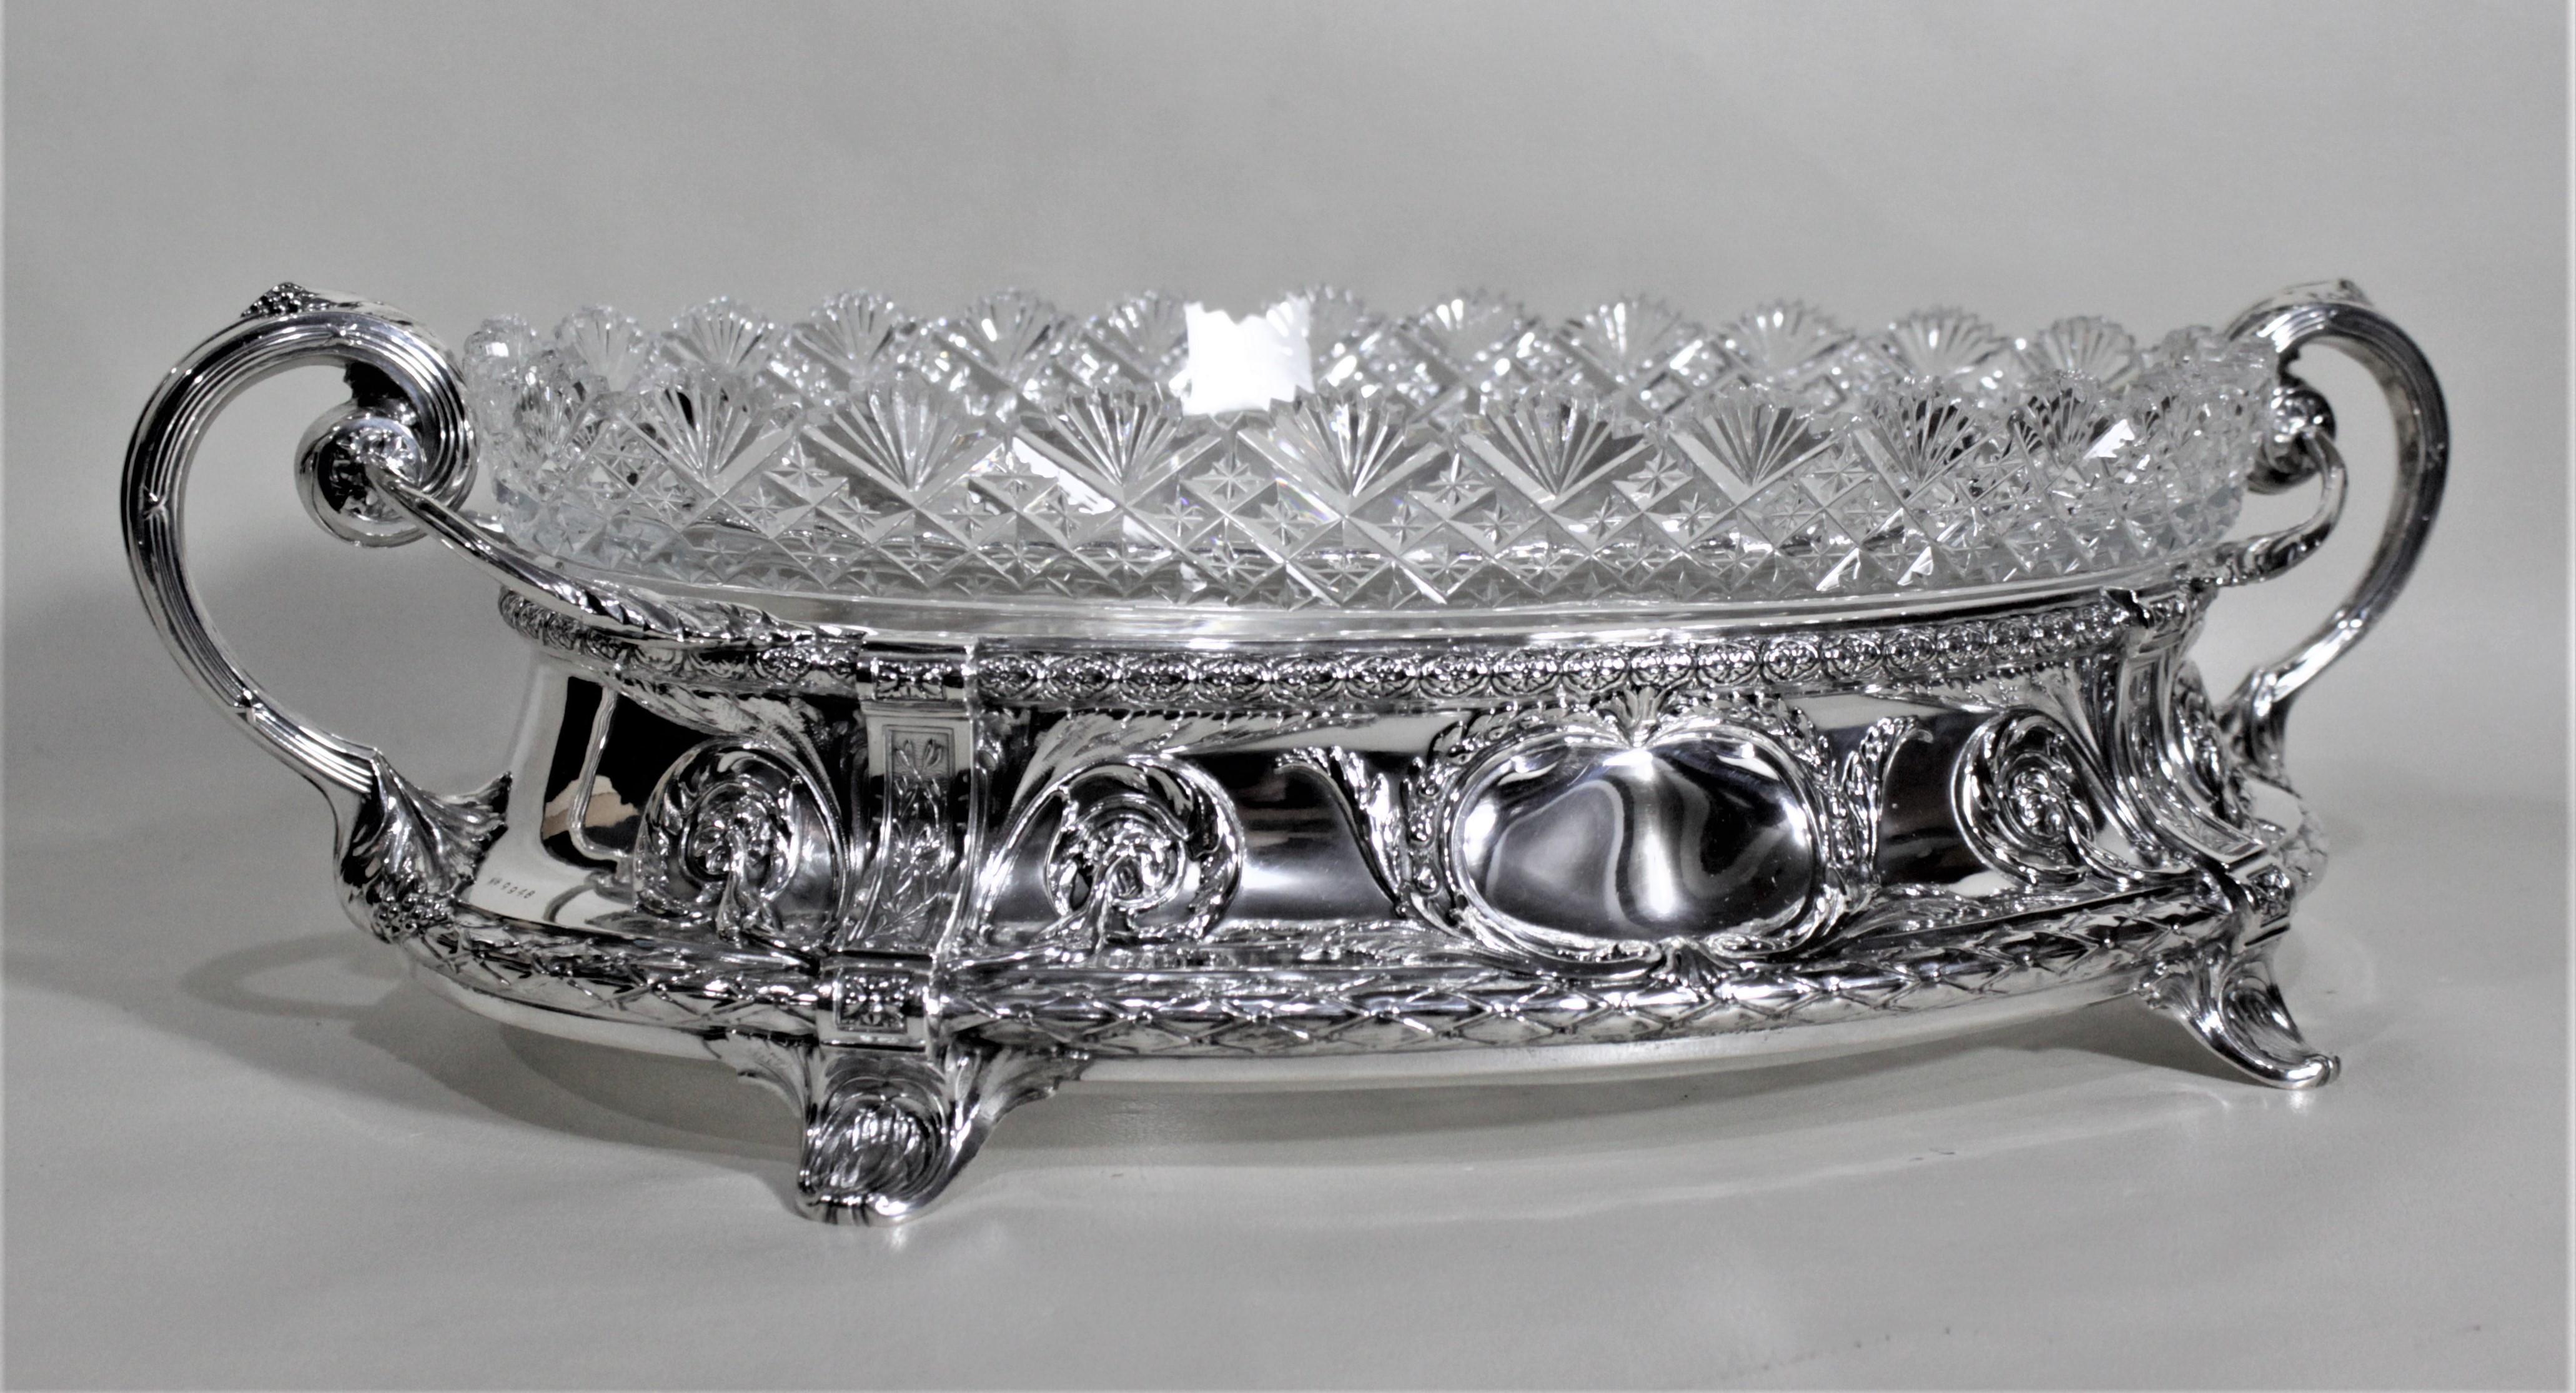 This antique German Continental silver and cut crystal centerpiece does have a maker's mark, but quite illegible so the maker is being regarded as 'Unknown'. This very ornately cast silver footed base is decorated with elaborate scrolling repousse